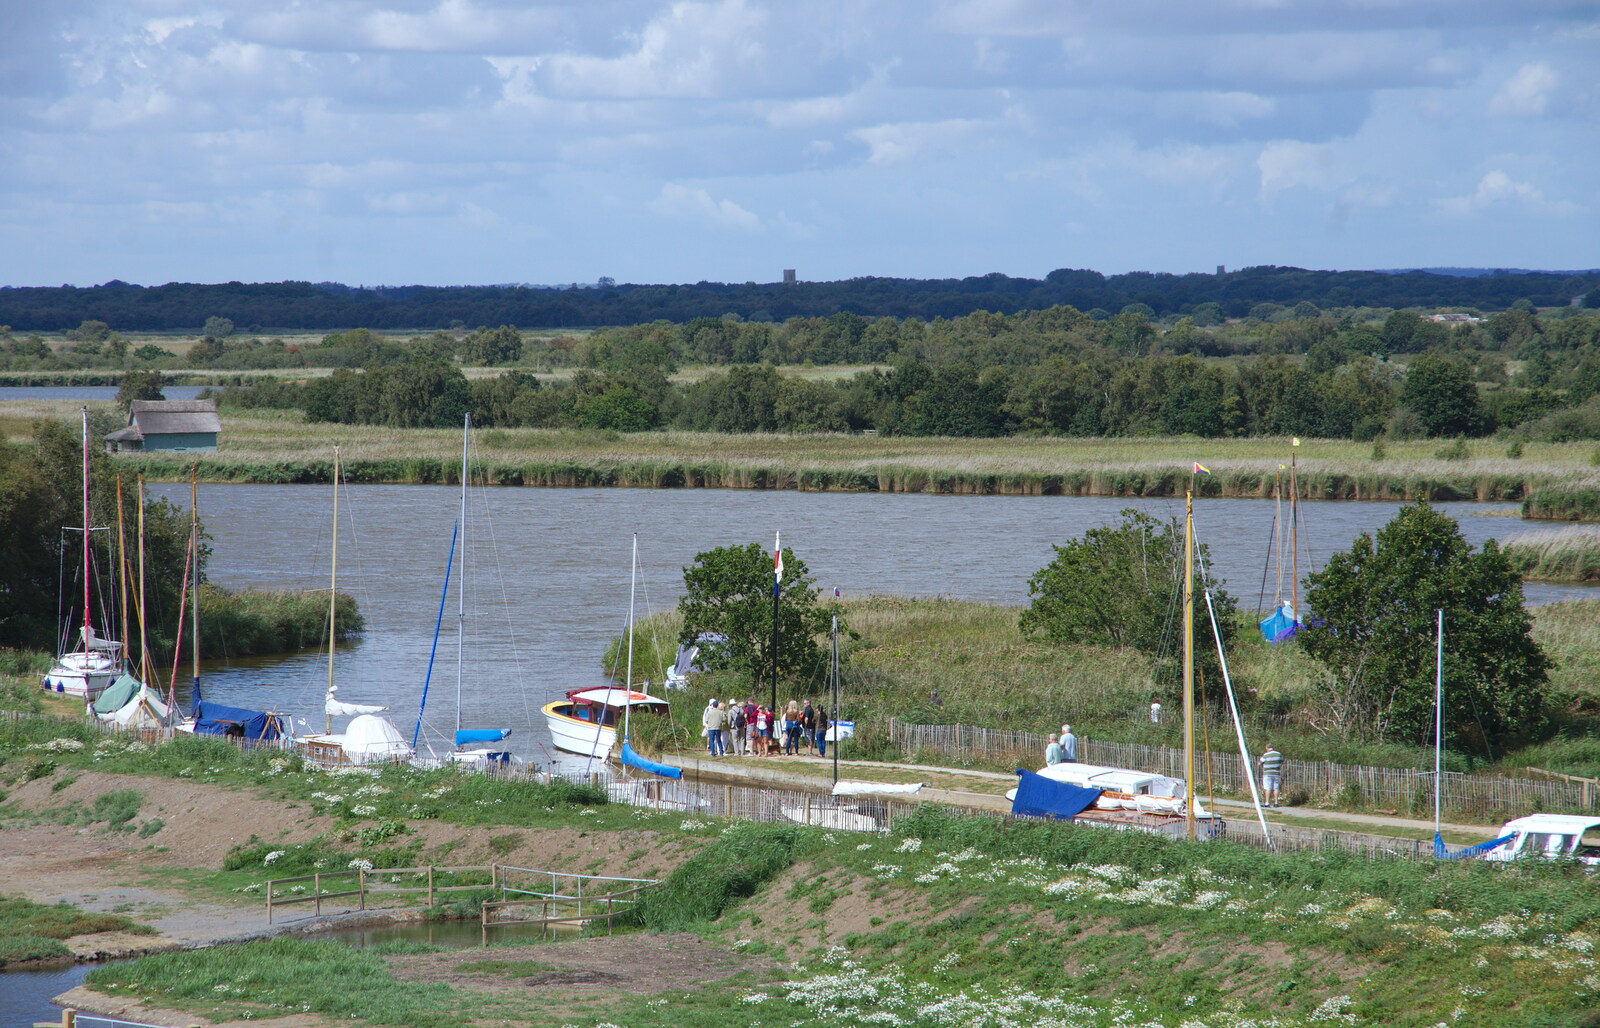 Horsey Mere from Waxham Sands and the Nelson Head Beer Festival, Horsey, Norfolk - 31st August 2019